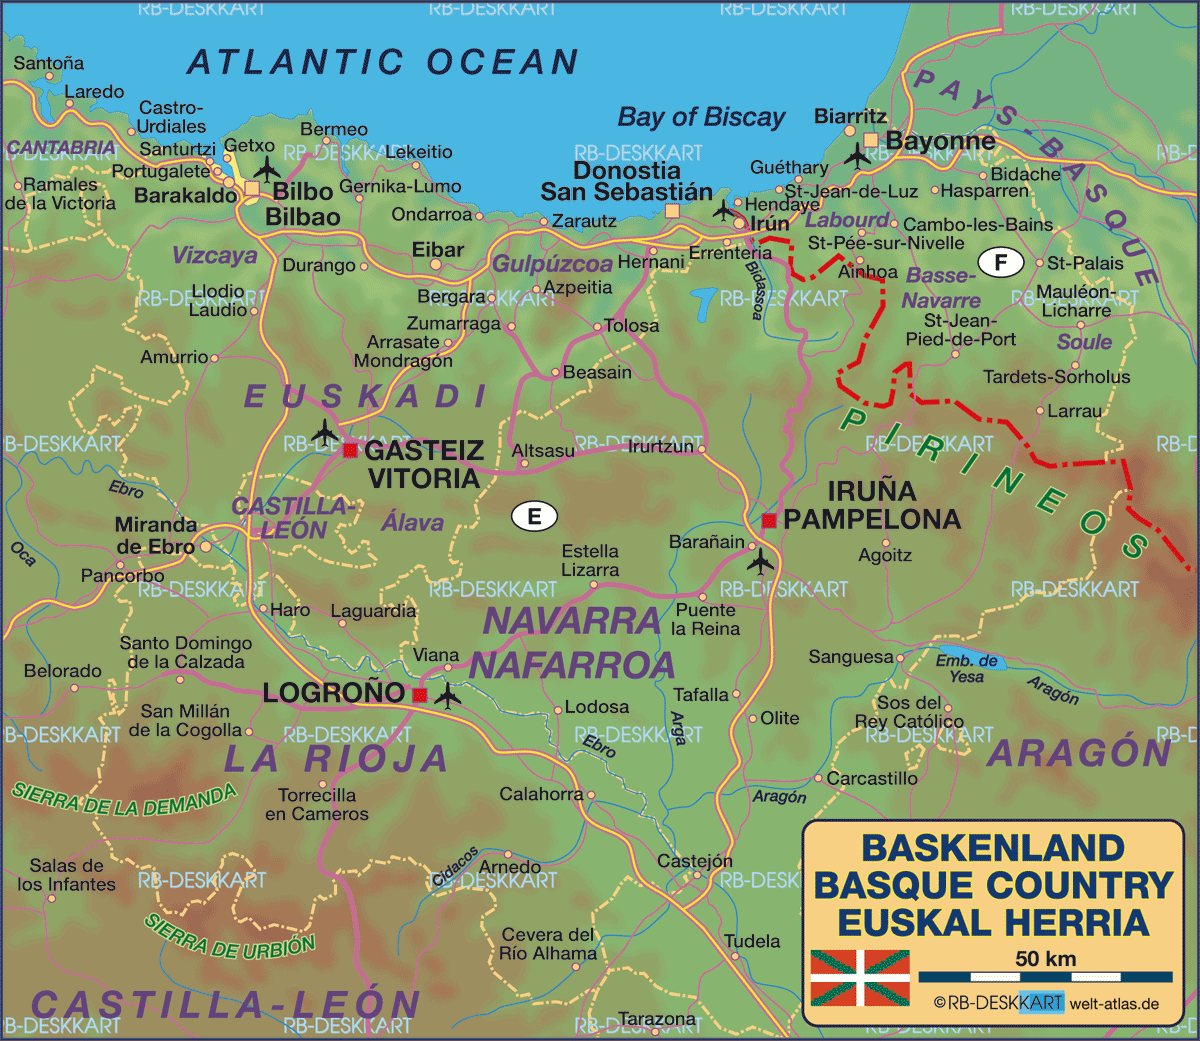 Map of Basque Country / Euskal Herria (Region in Spain, France)